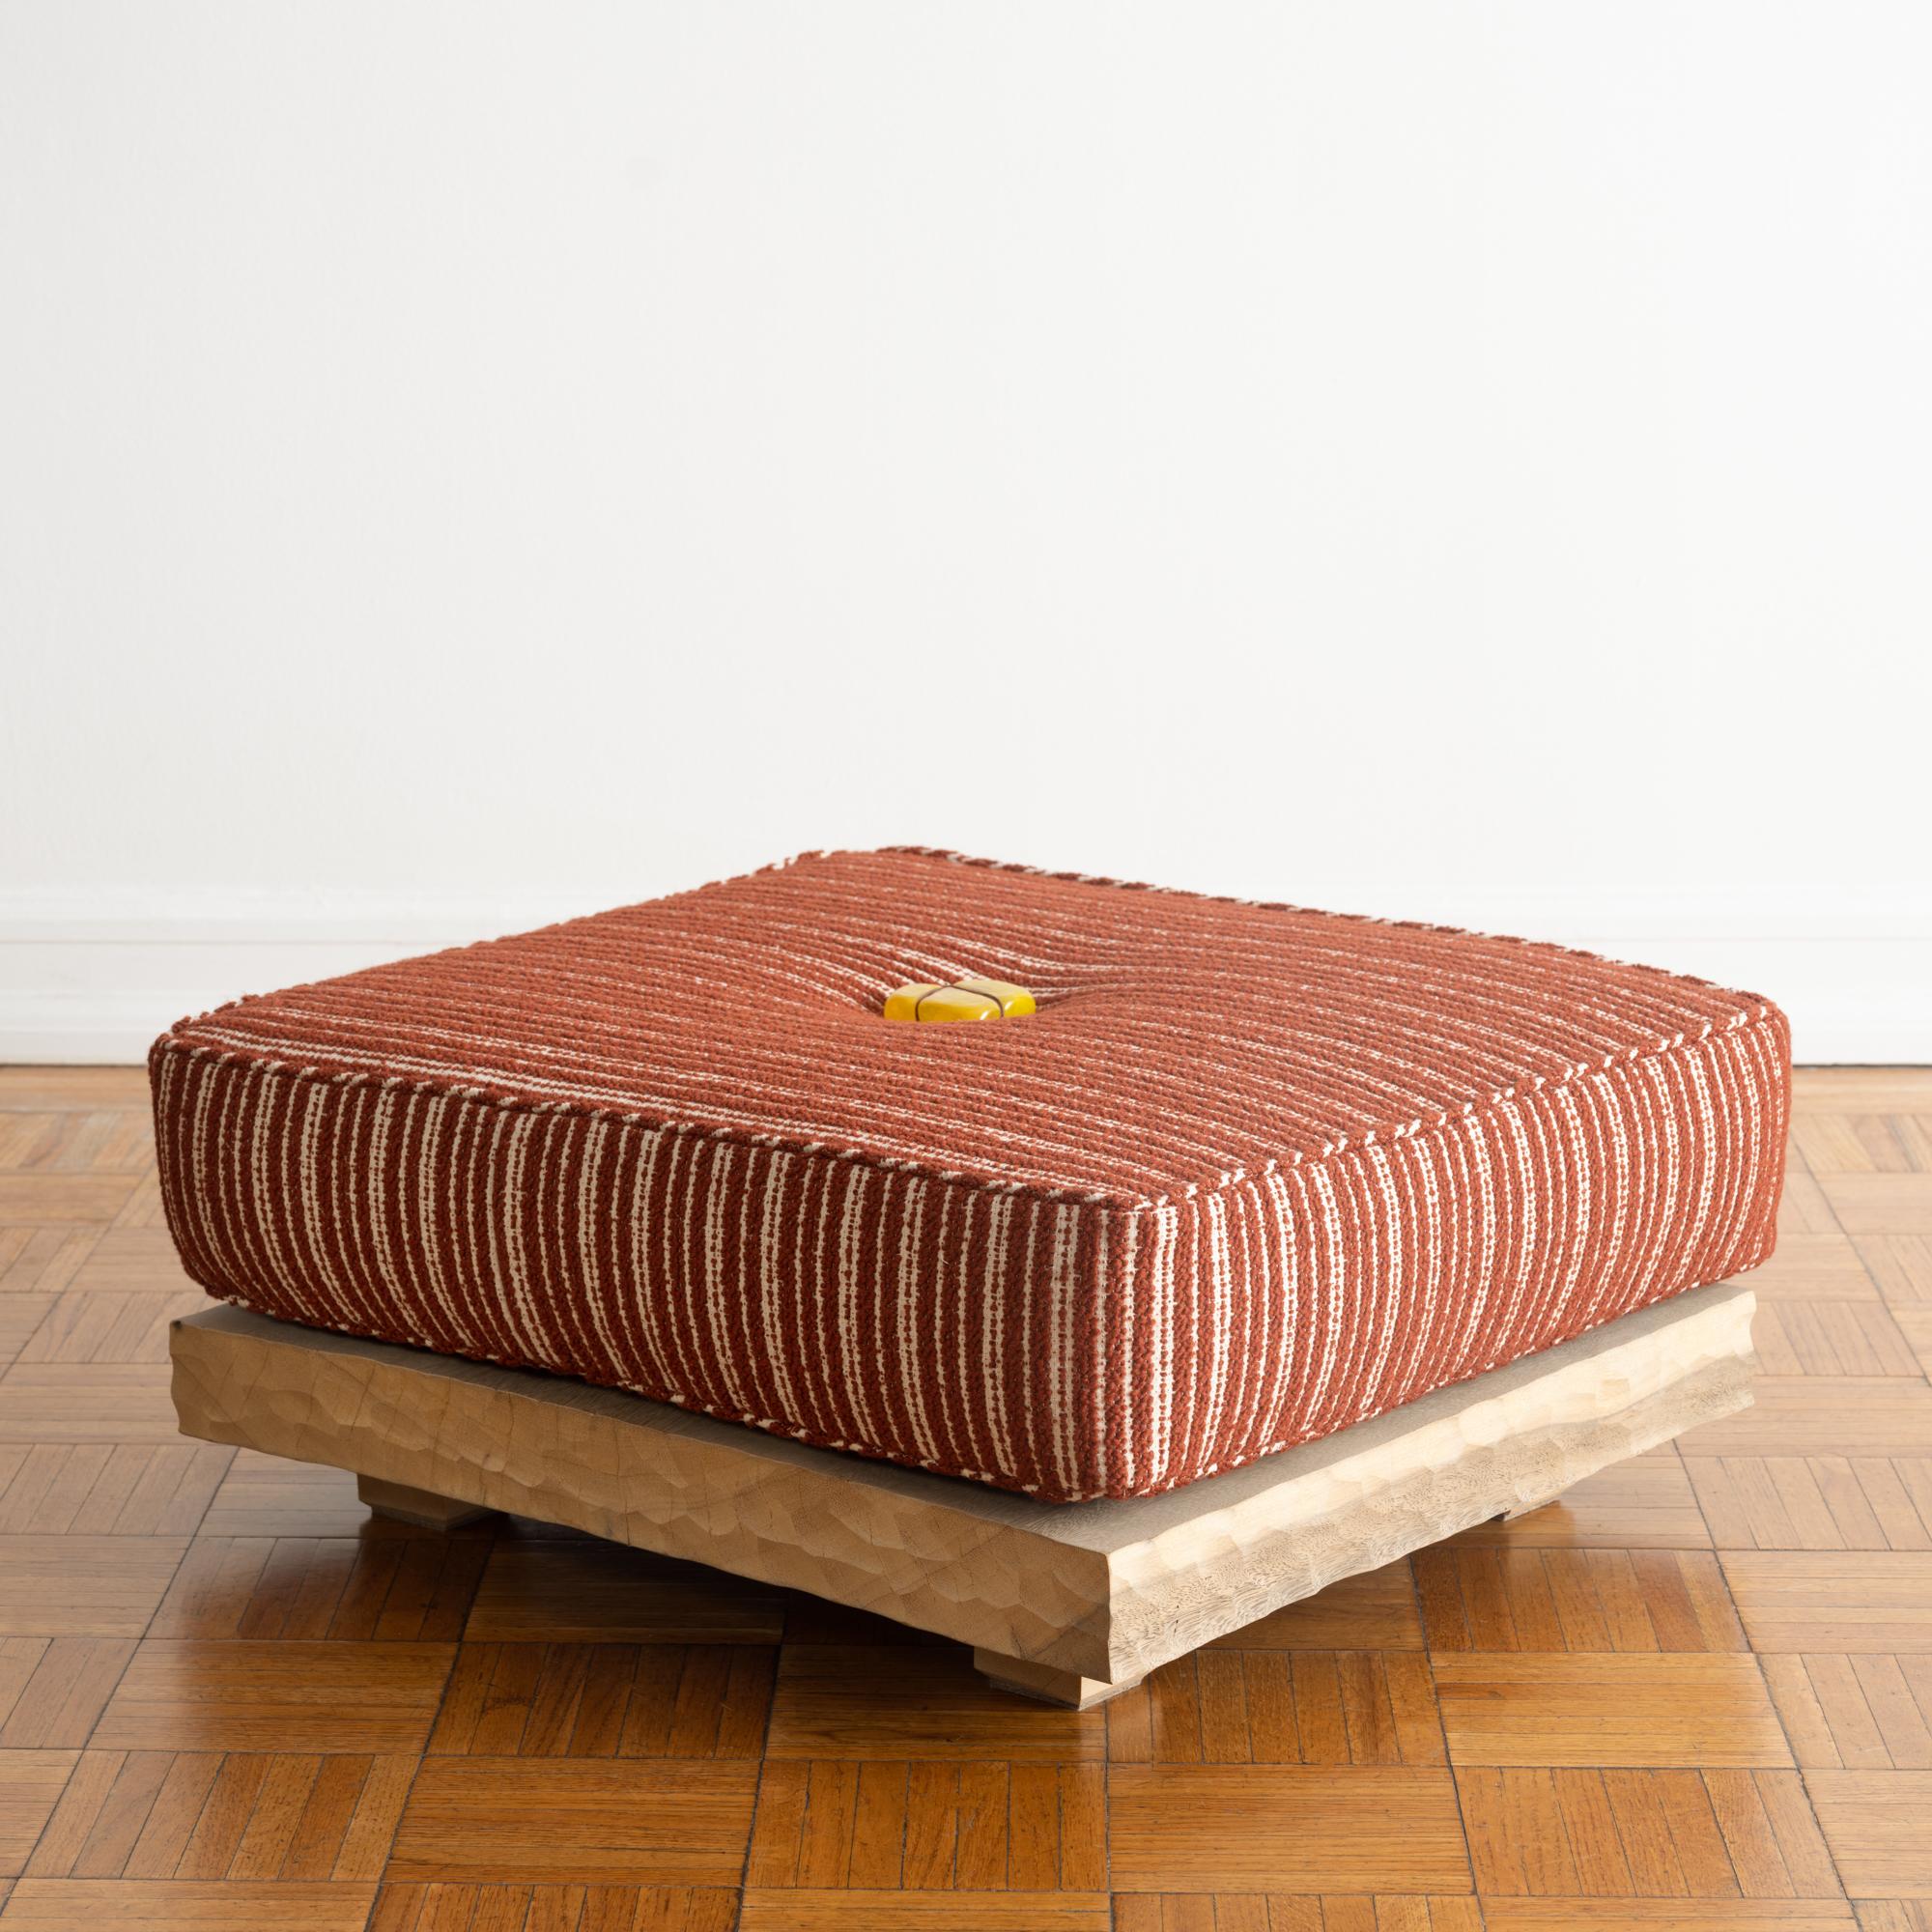 American Low Ottoman with Upholstered Seat Cushion on Hand-carved Reclaimed Wood Base For Sale